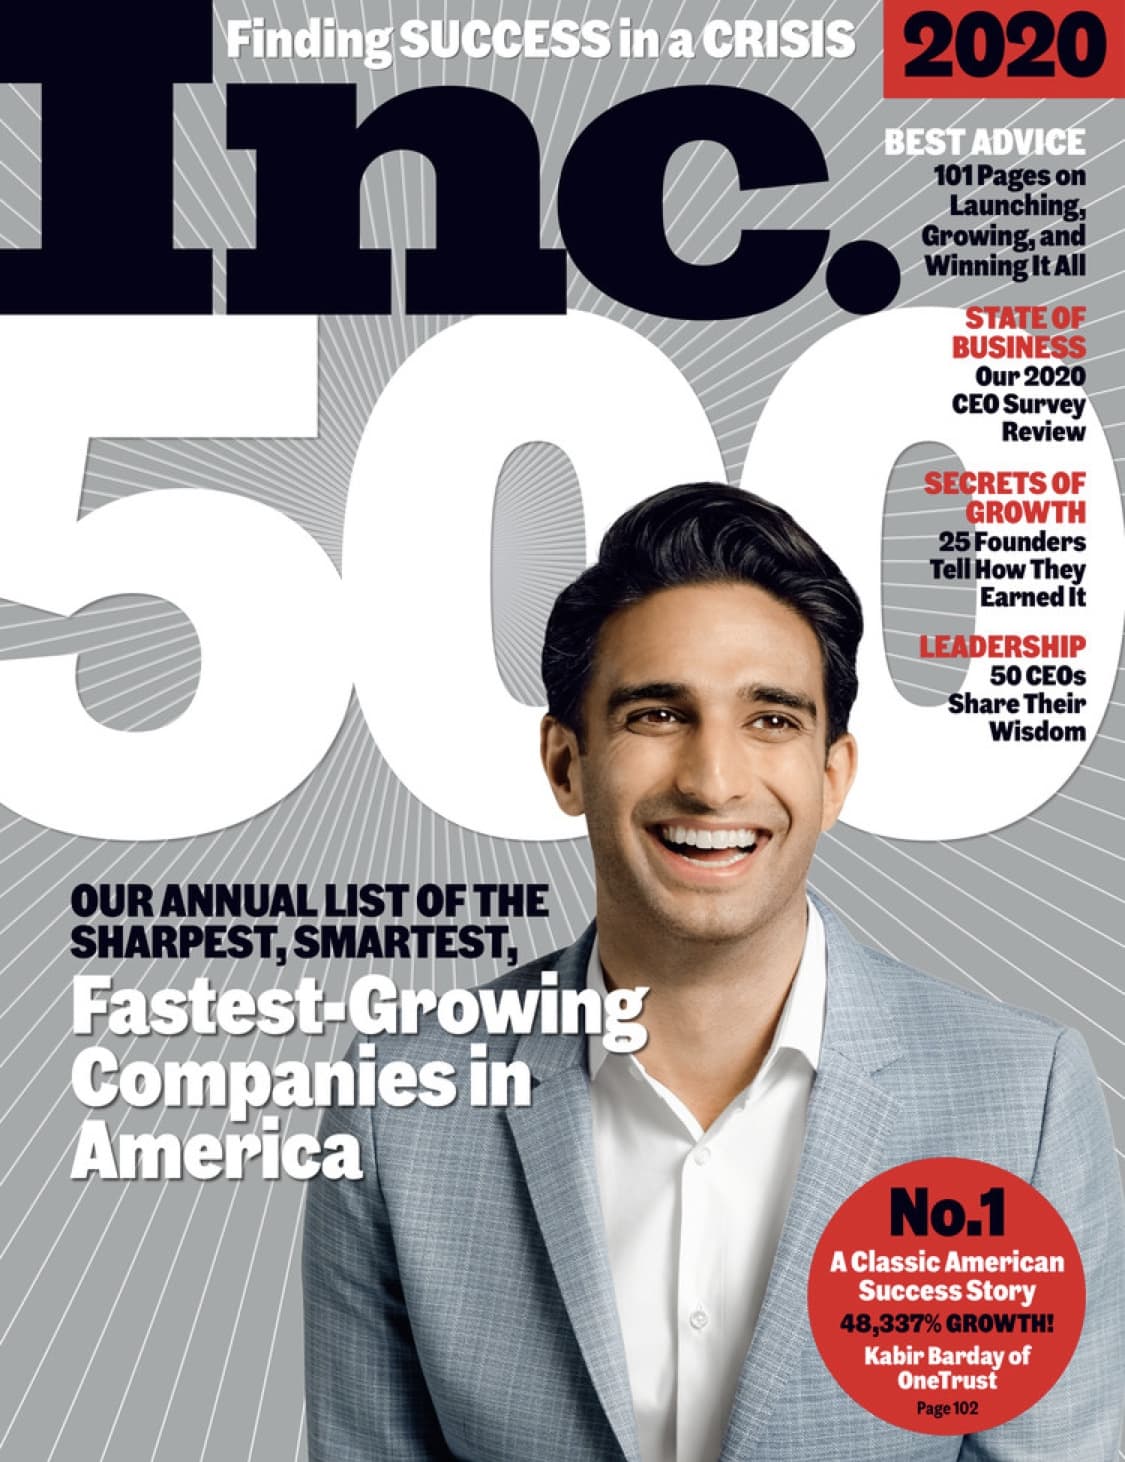 The cover of the Inc. 500 magazine featuring Kabir Barday highlighting the annual list of the fastes-growing companies in America